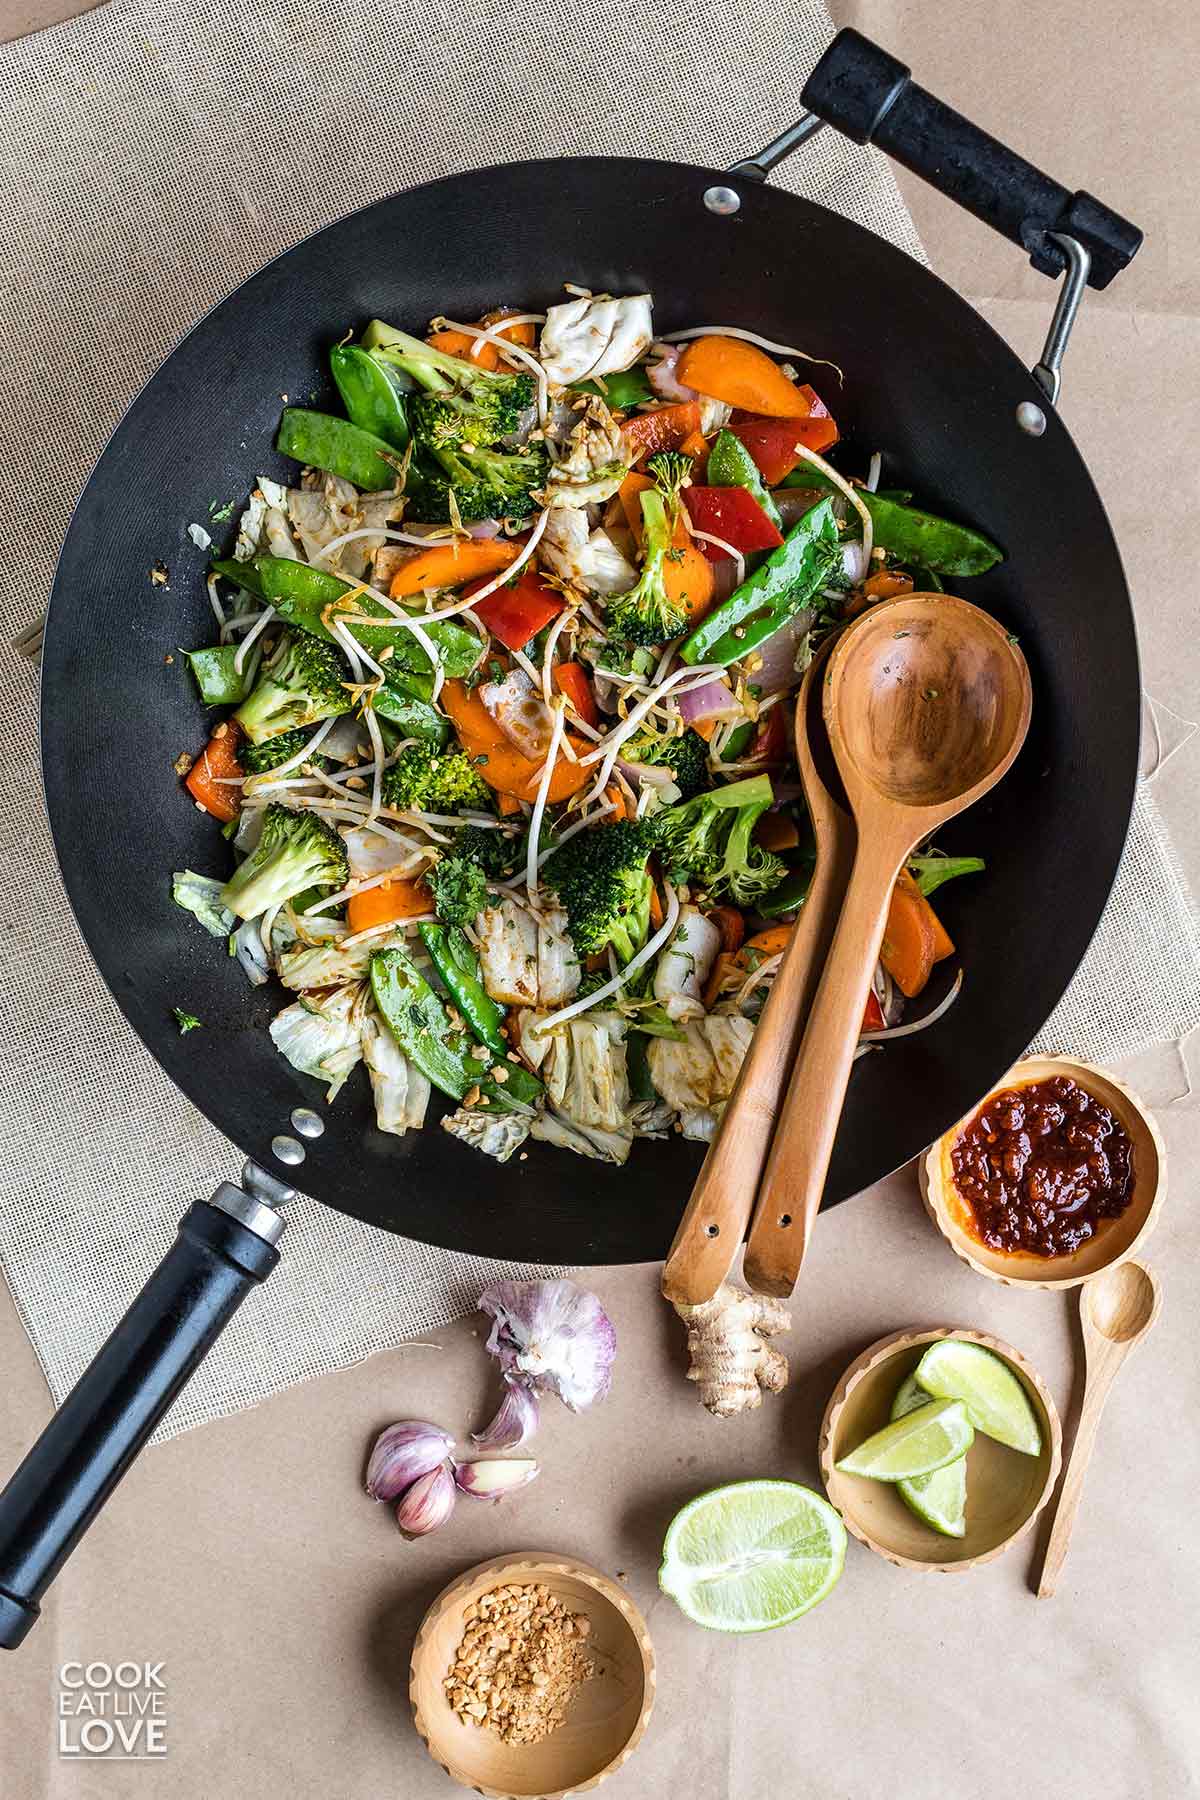 Spicy stir fry vegetables in a wok ready to serve.